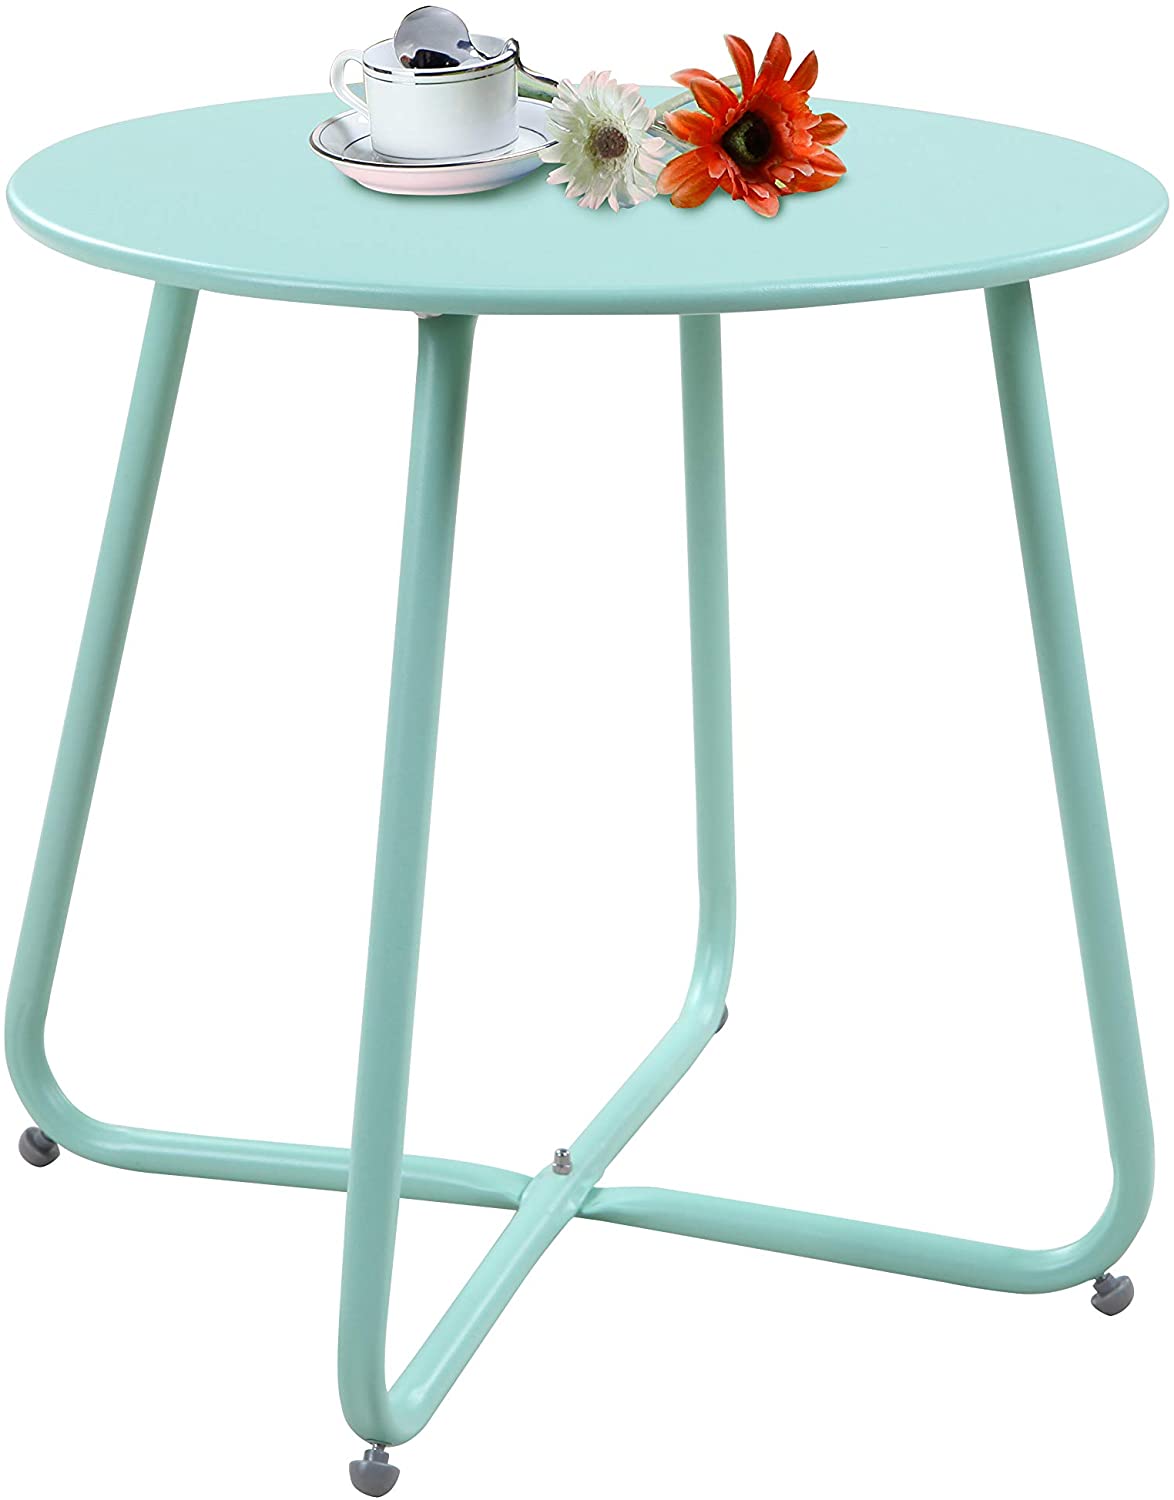 Steel Patio Side Table | Round & Retro Style | Weather Resistant for Outdoor Living | Mint Green